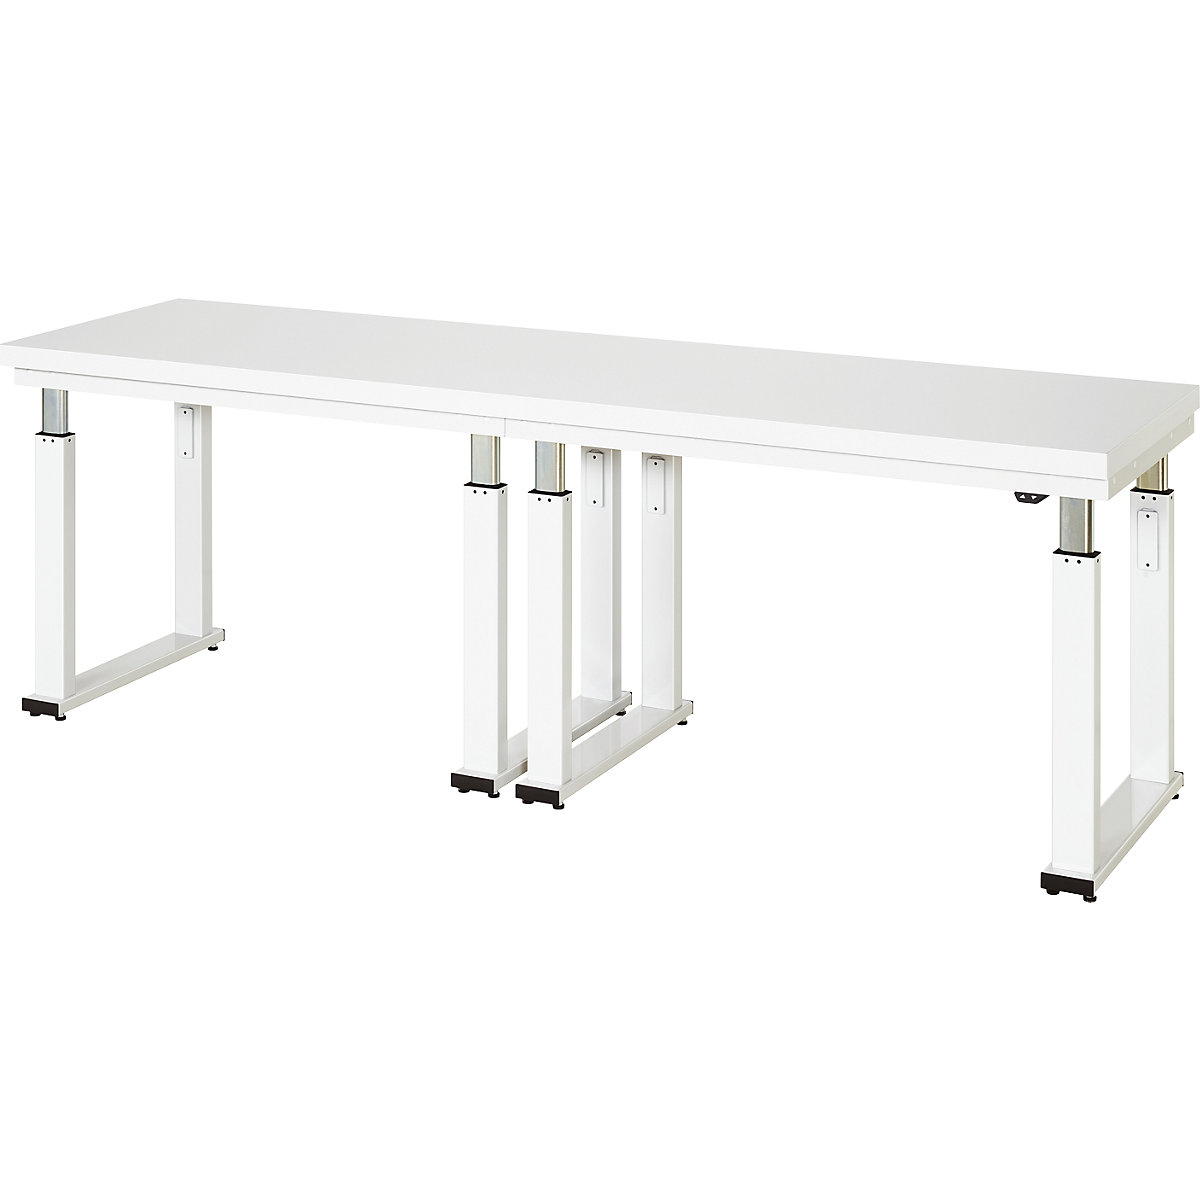 Work table, electric height adjustment – RAU, hardened laminate worktop, max. load 600 kg, WxD 2500 x 700 mm-16